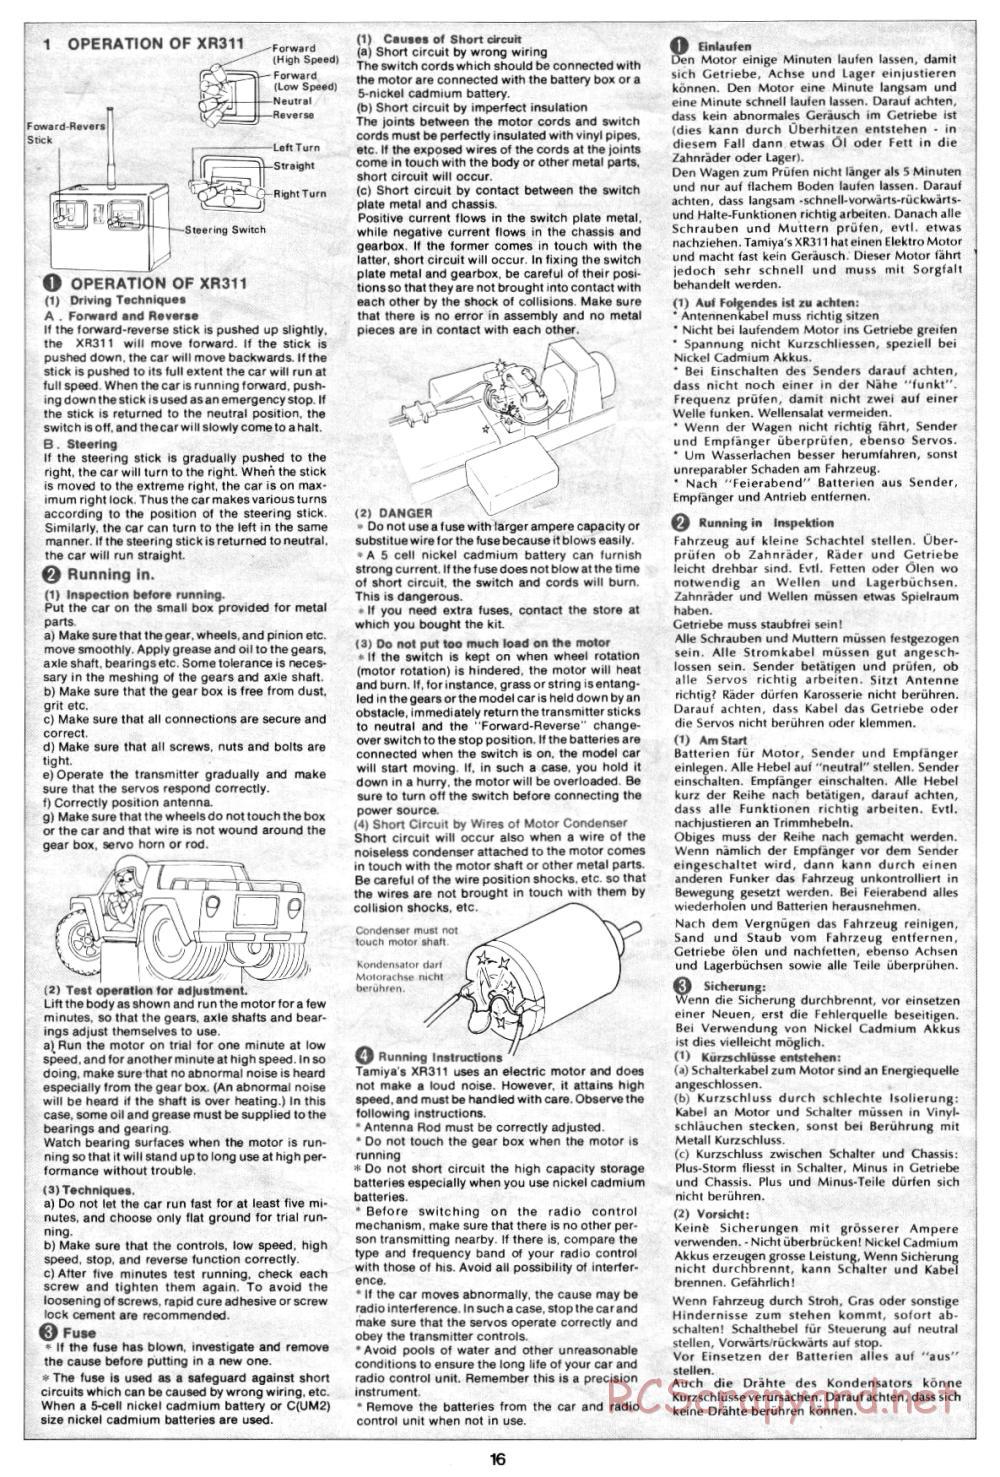 Tamiya - XR311 Combat Support Vehicle (1977) Chassis - Manual - Page 16